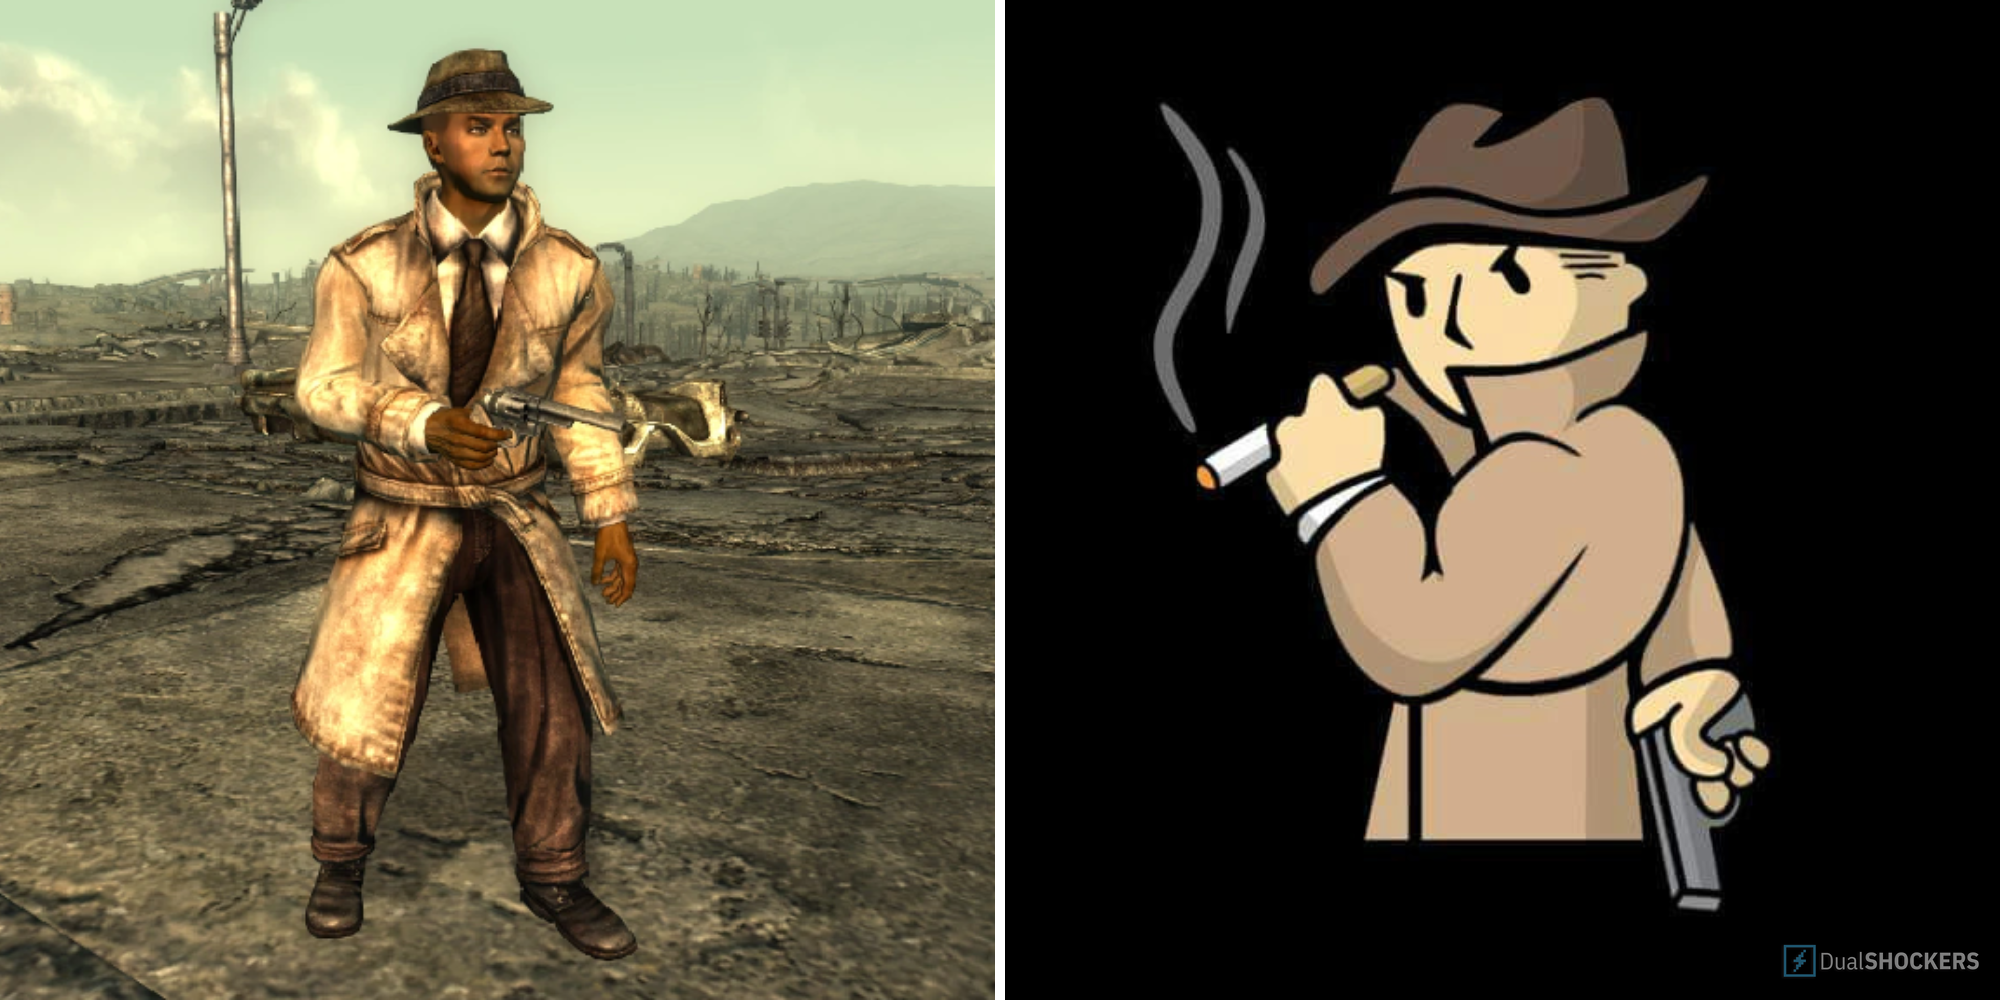 Fallout Fans Debate Who Should Play The Mysterious Stranger In Season 2